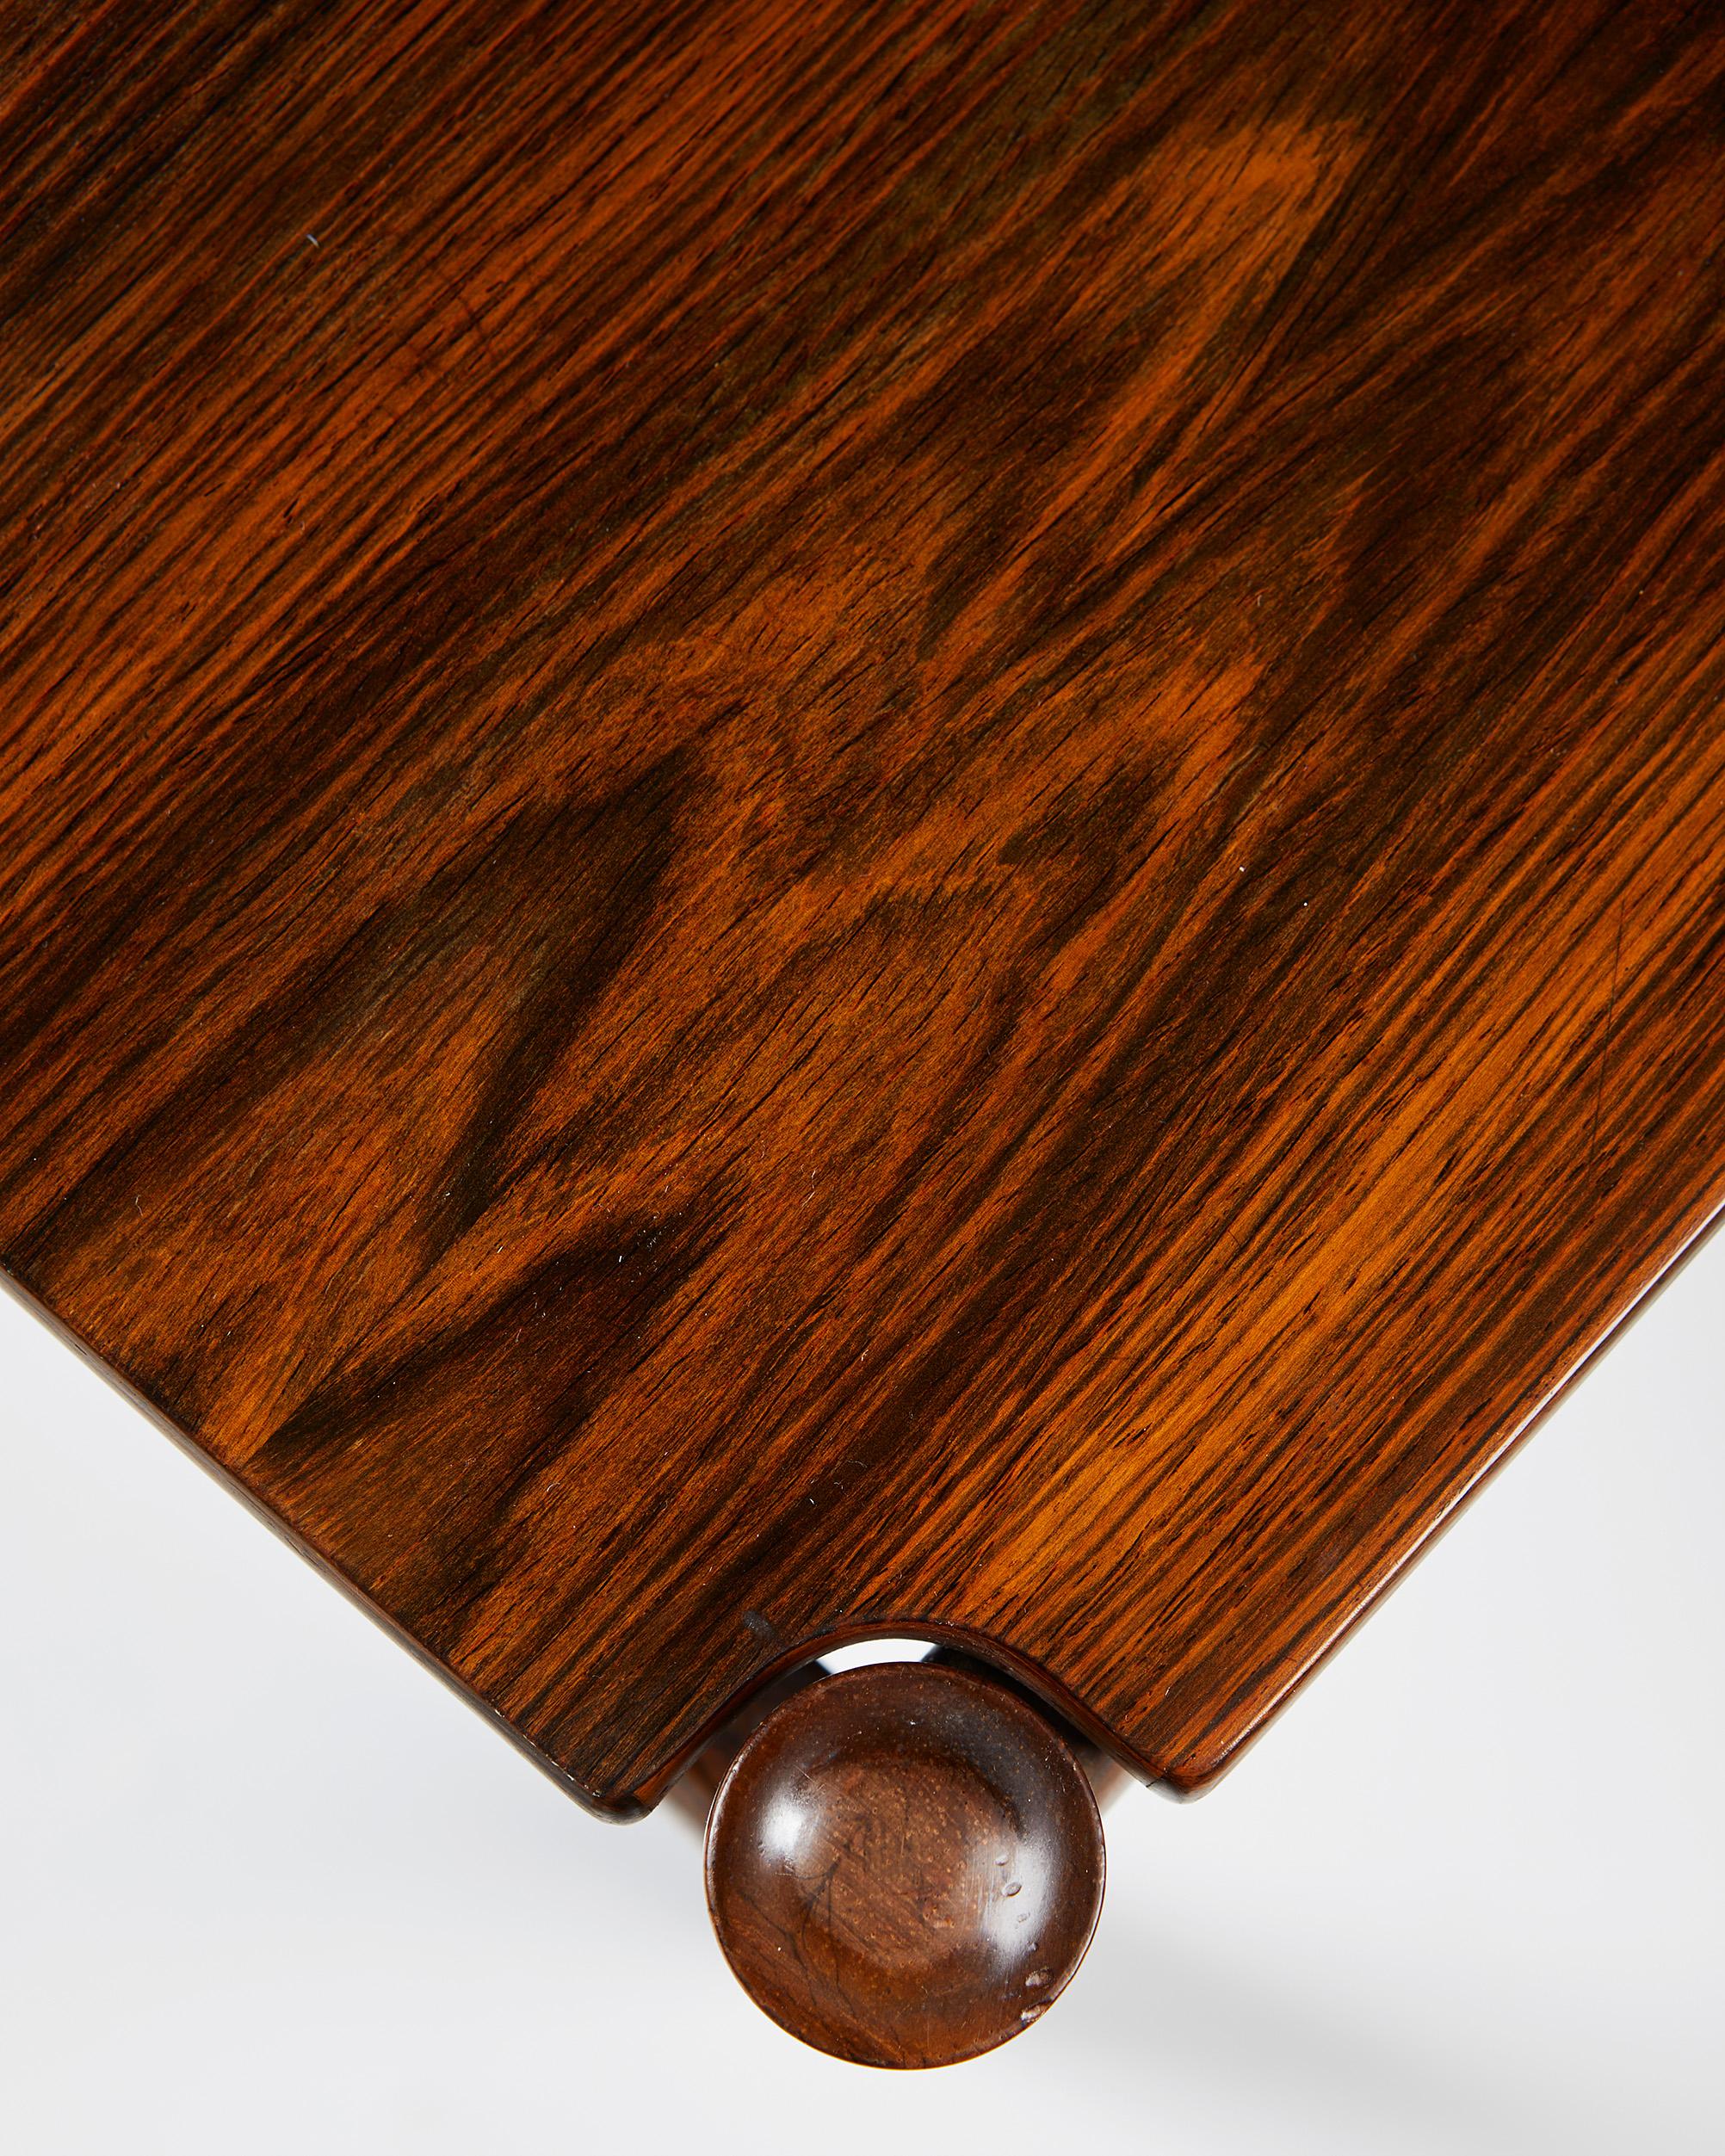 Rosewood Occasional Table “Colonial” Designed by Ole Wanscher for P. Jeppesen